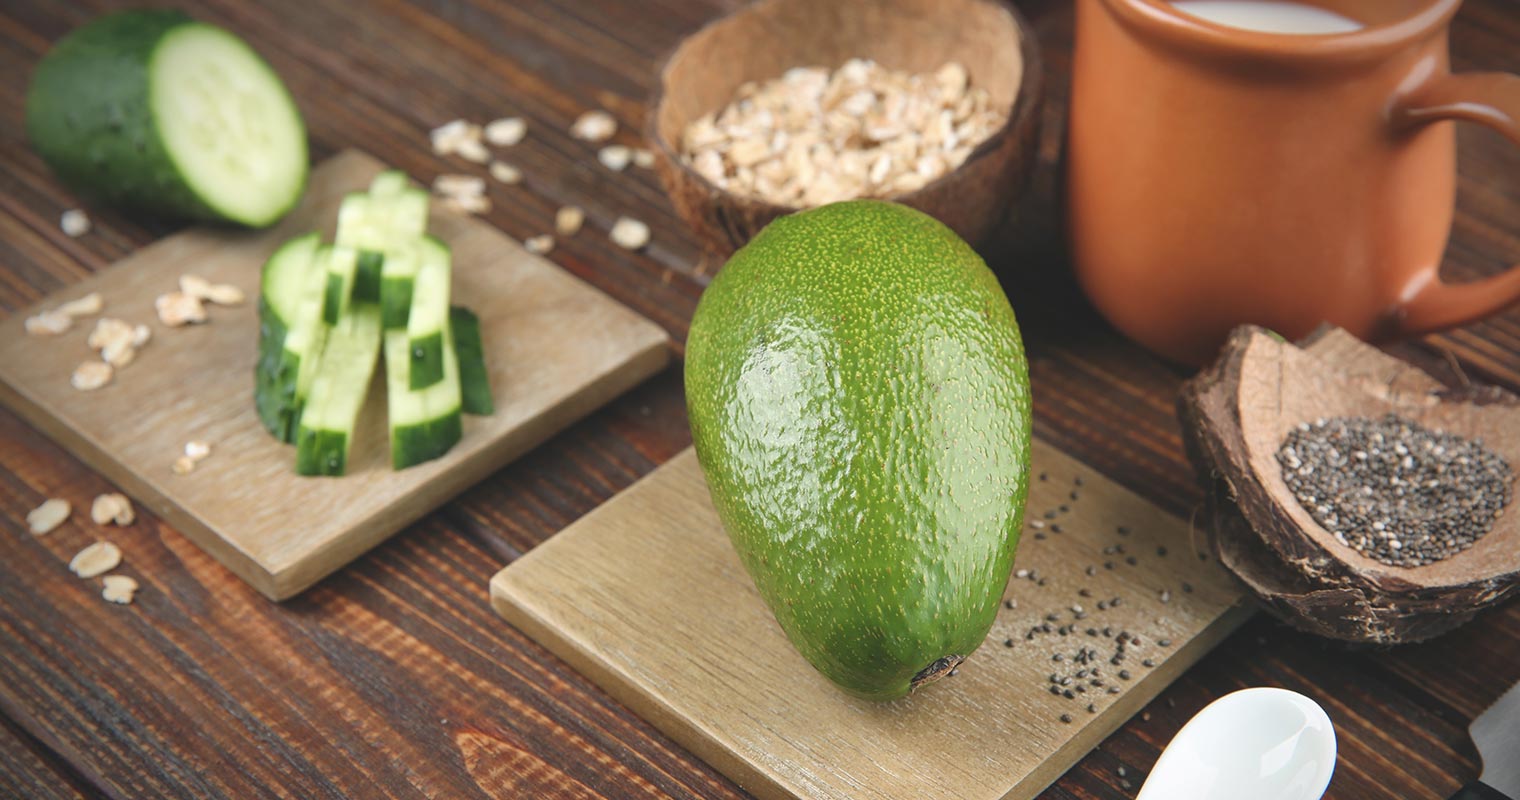 Anti-aging foods include avocado, cucumber, and oats - helps you have smoother skin.